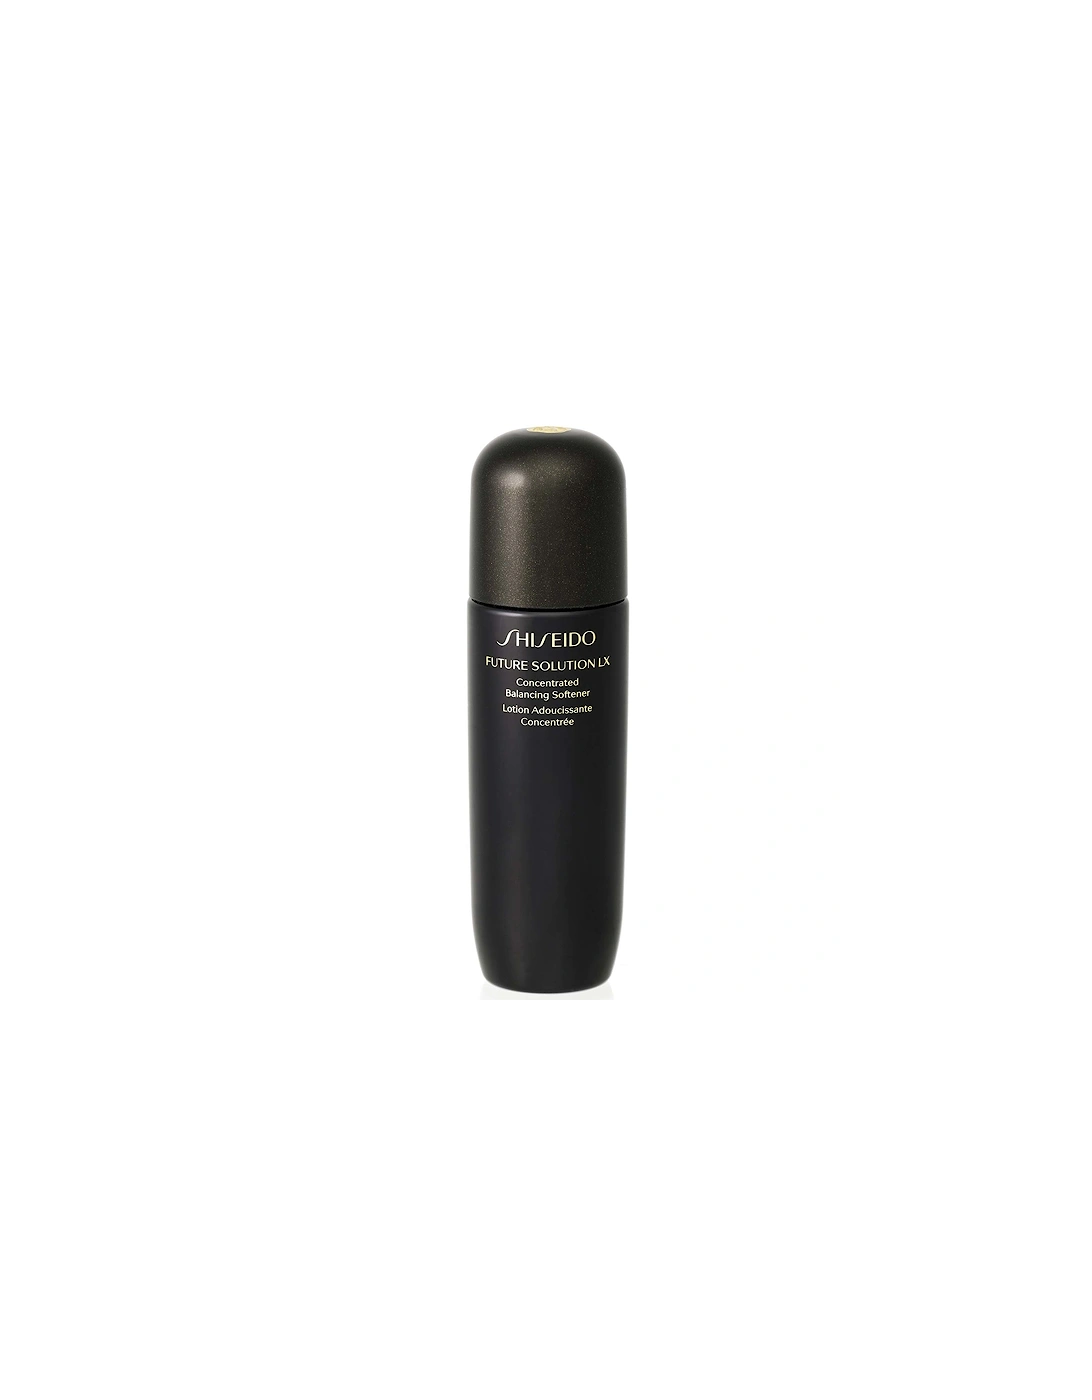 Future Solution LX Concentrated Balancing Softener 170ml - Shiseido, 2 of 1